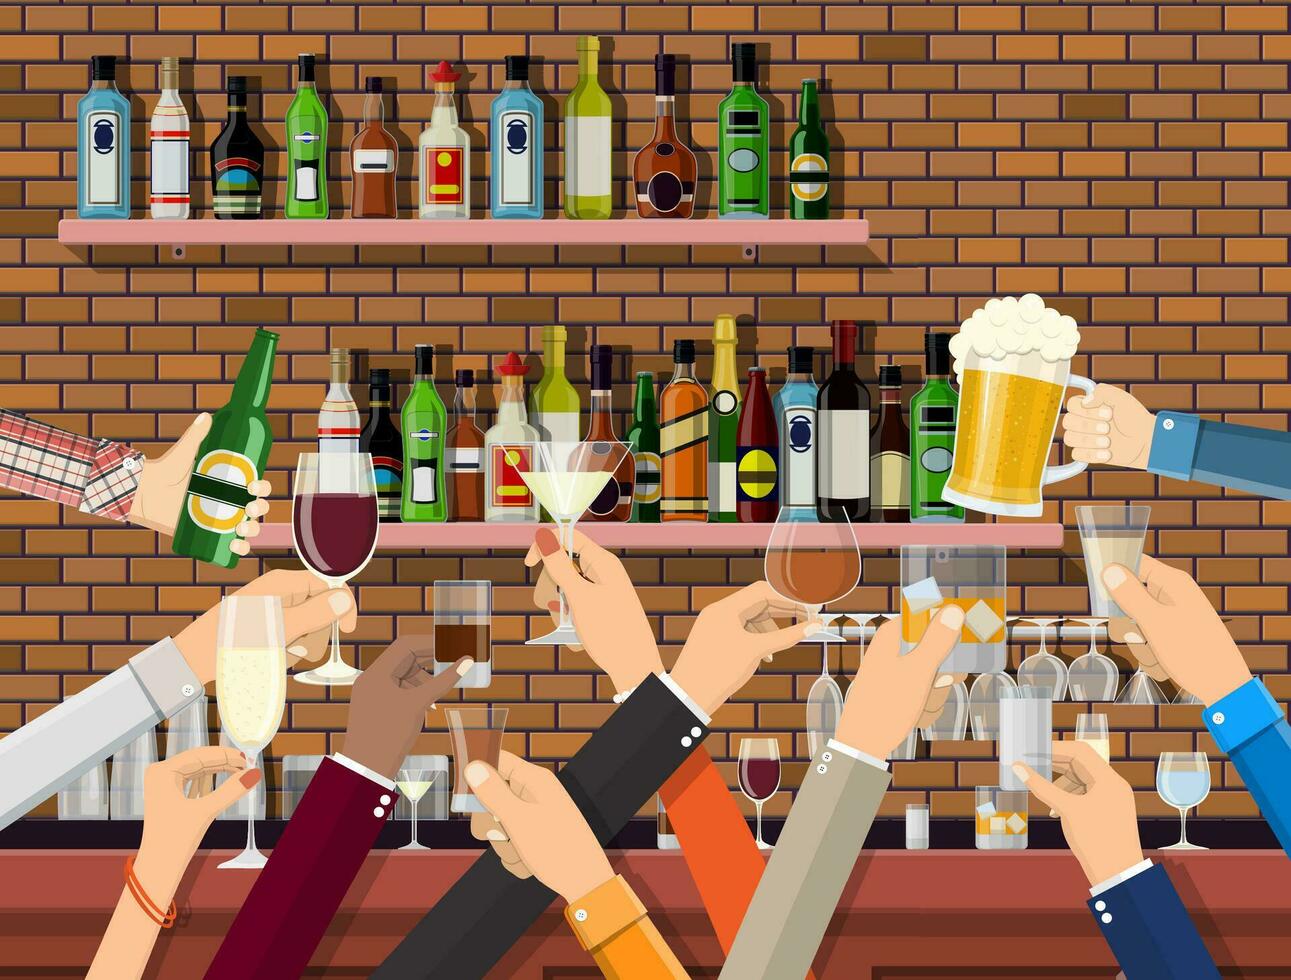 Hands group holding glasses with various drinks. Drinking establishment. Interior of pub cafe or bar. Bar counter, shelves with alcohol bottles. Celebration ceremony. Vector Illustration in flat style